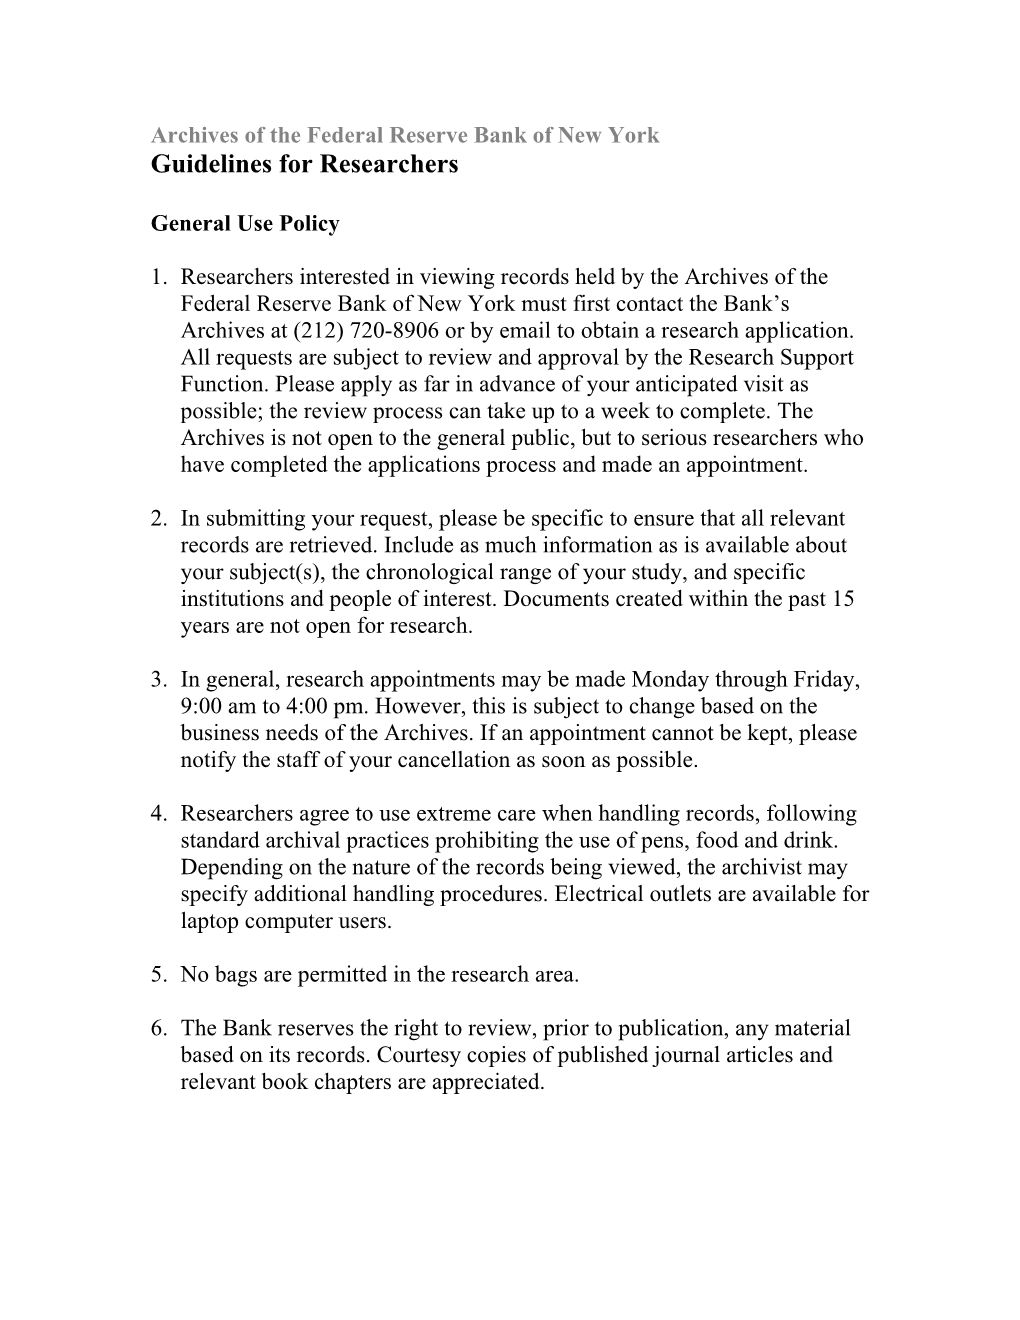 Guidelines for Researchers